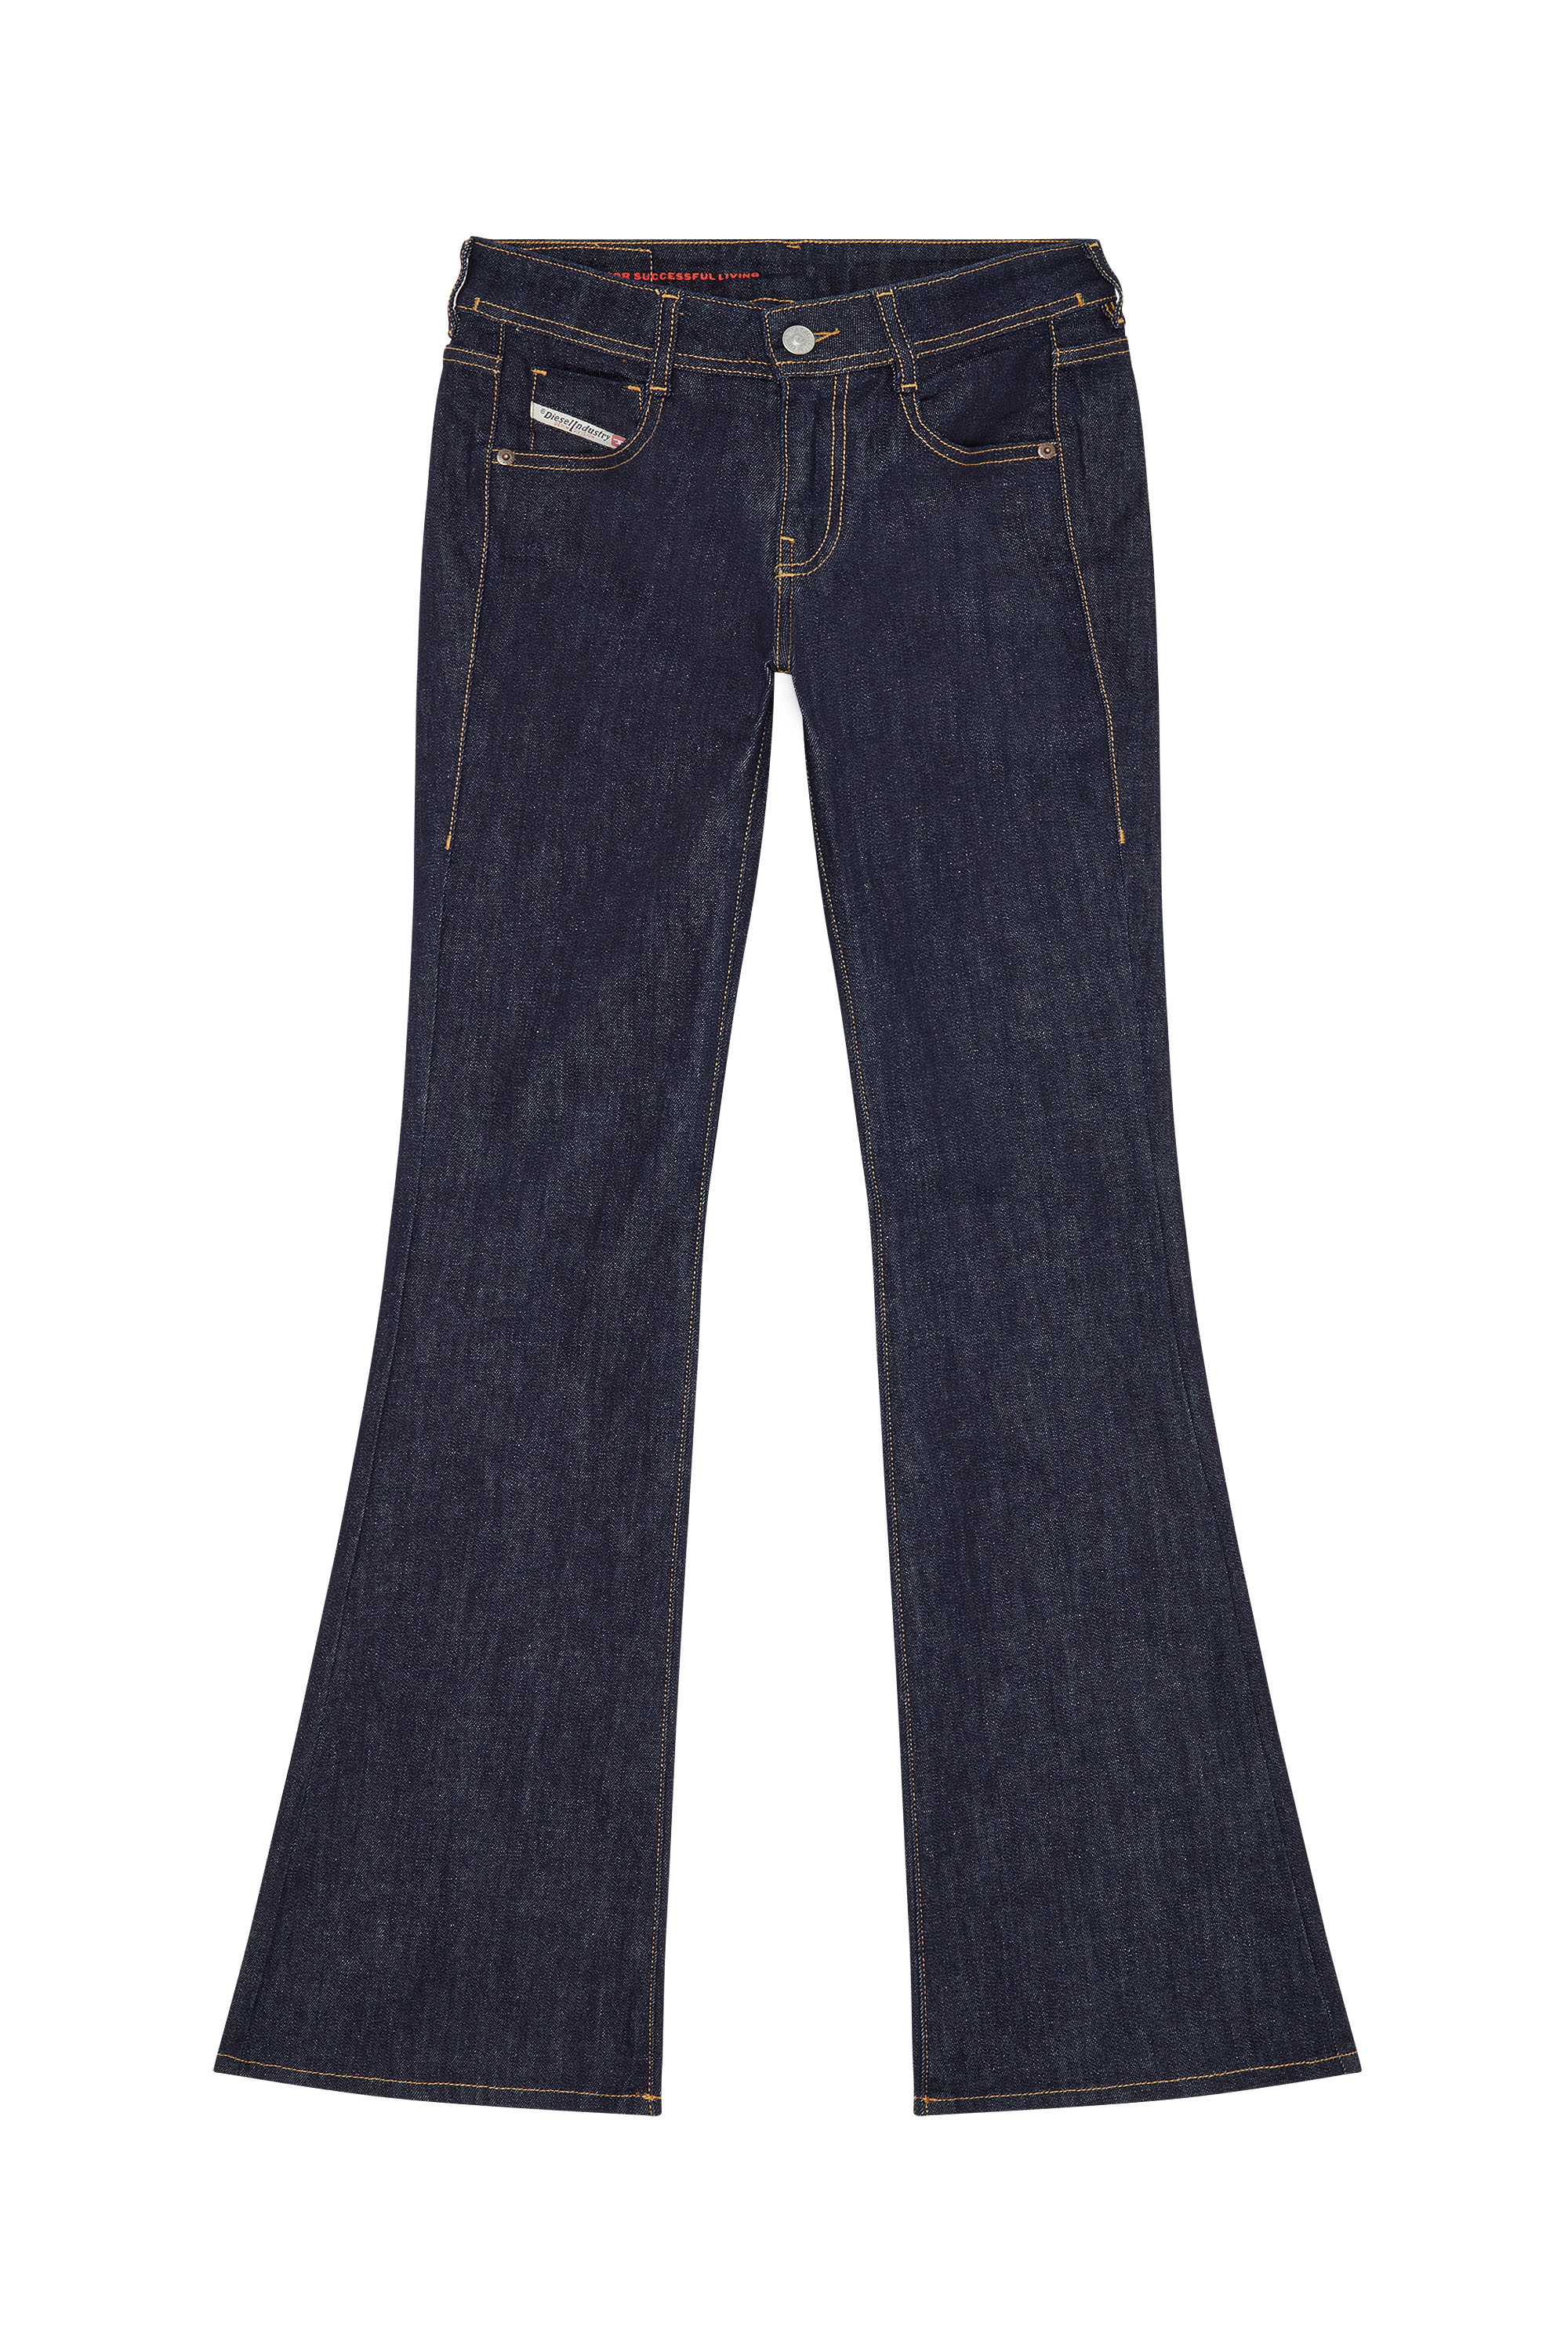 1969 D-EBBEY Z9B89 Bootcut and Flare Jeans, Blu Scuro - Jeans